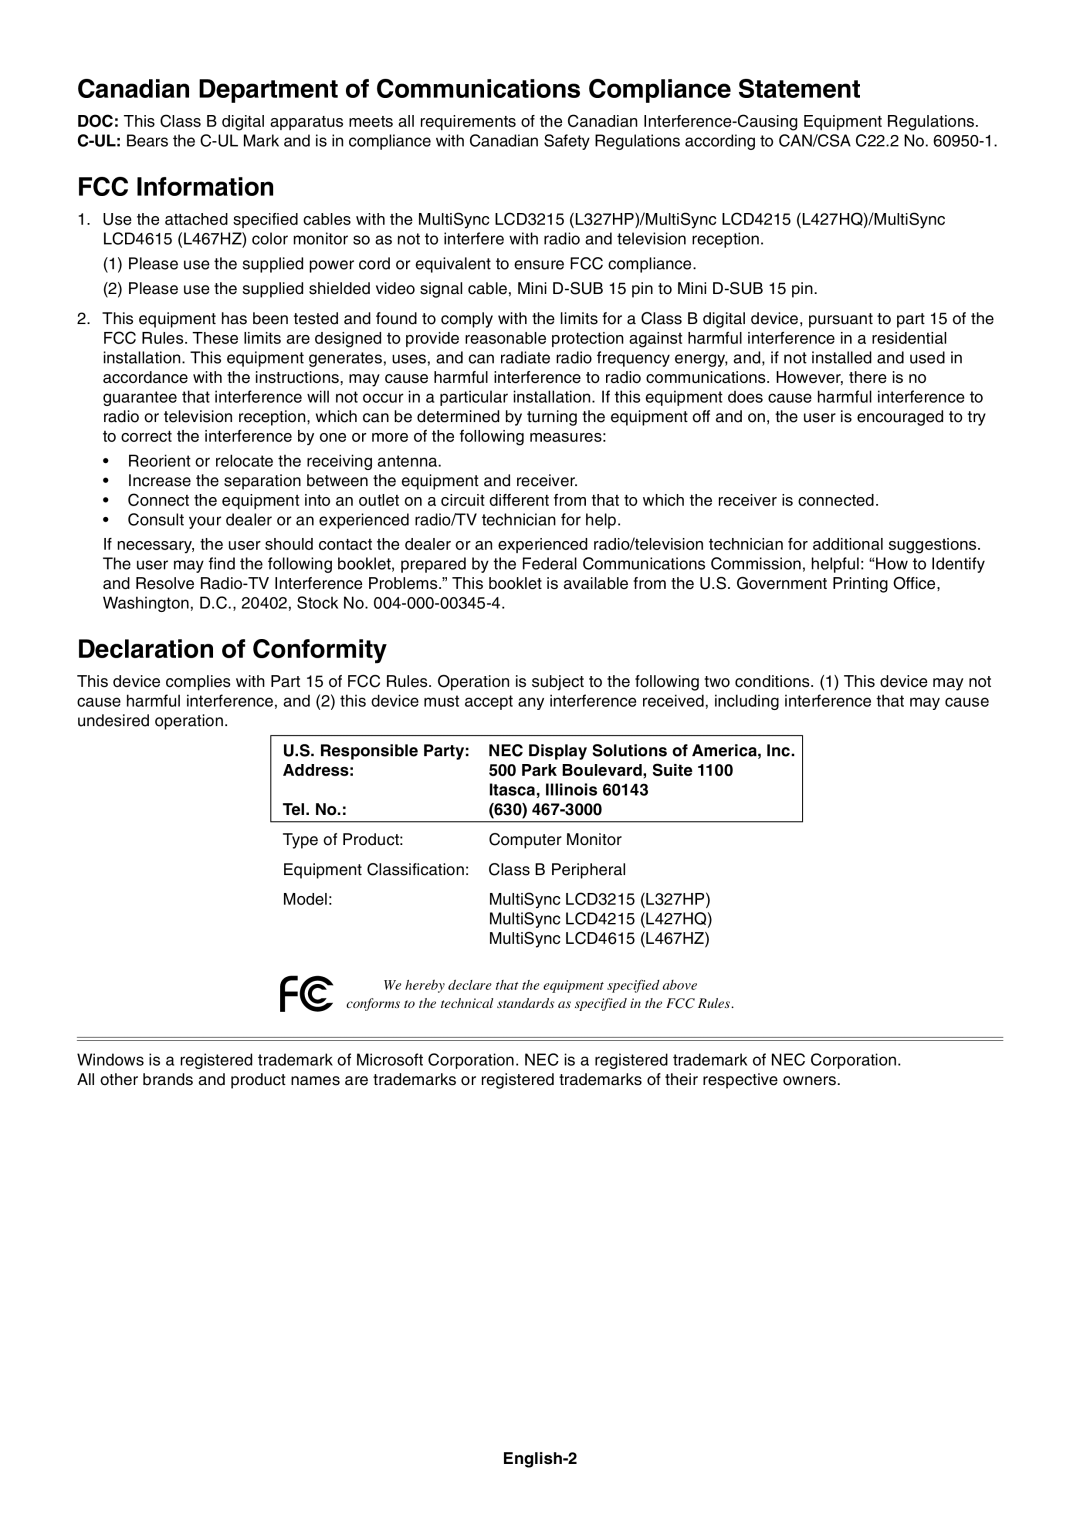 NEC LCD4615 Canadian Department of Communications Compliance Statement, FCC Information, Declaration of Conformity 